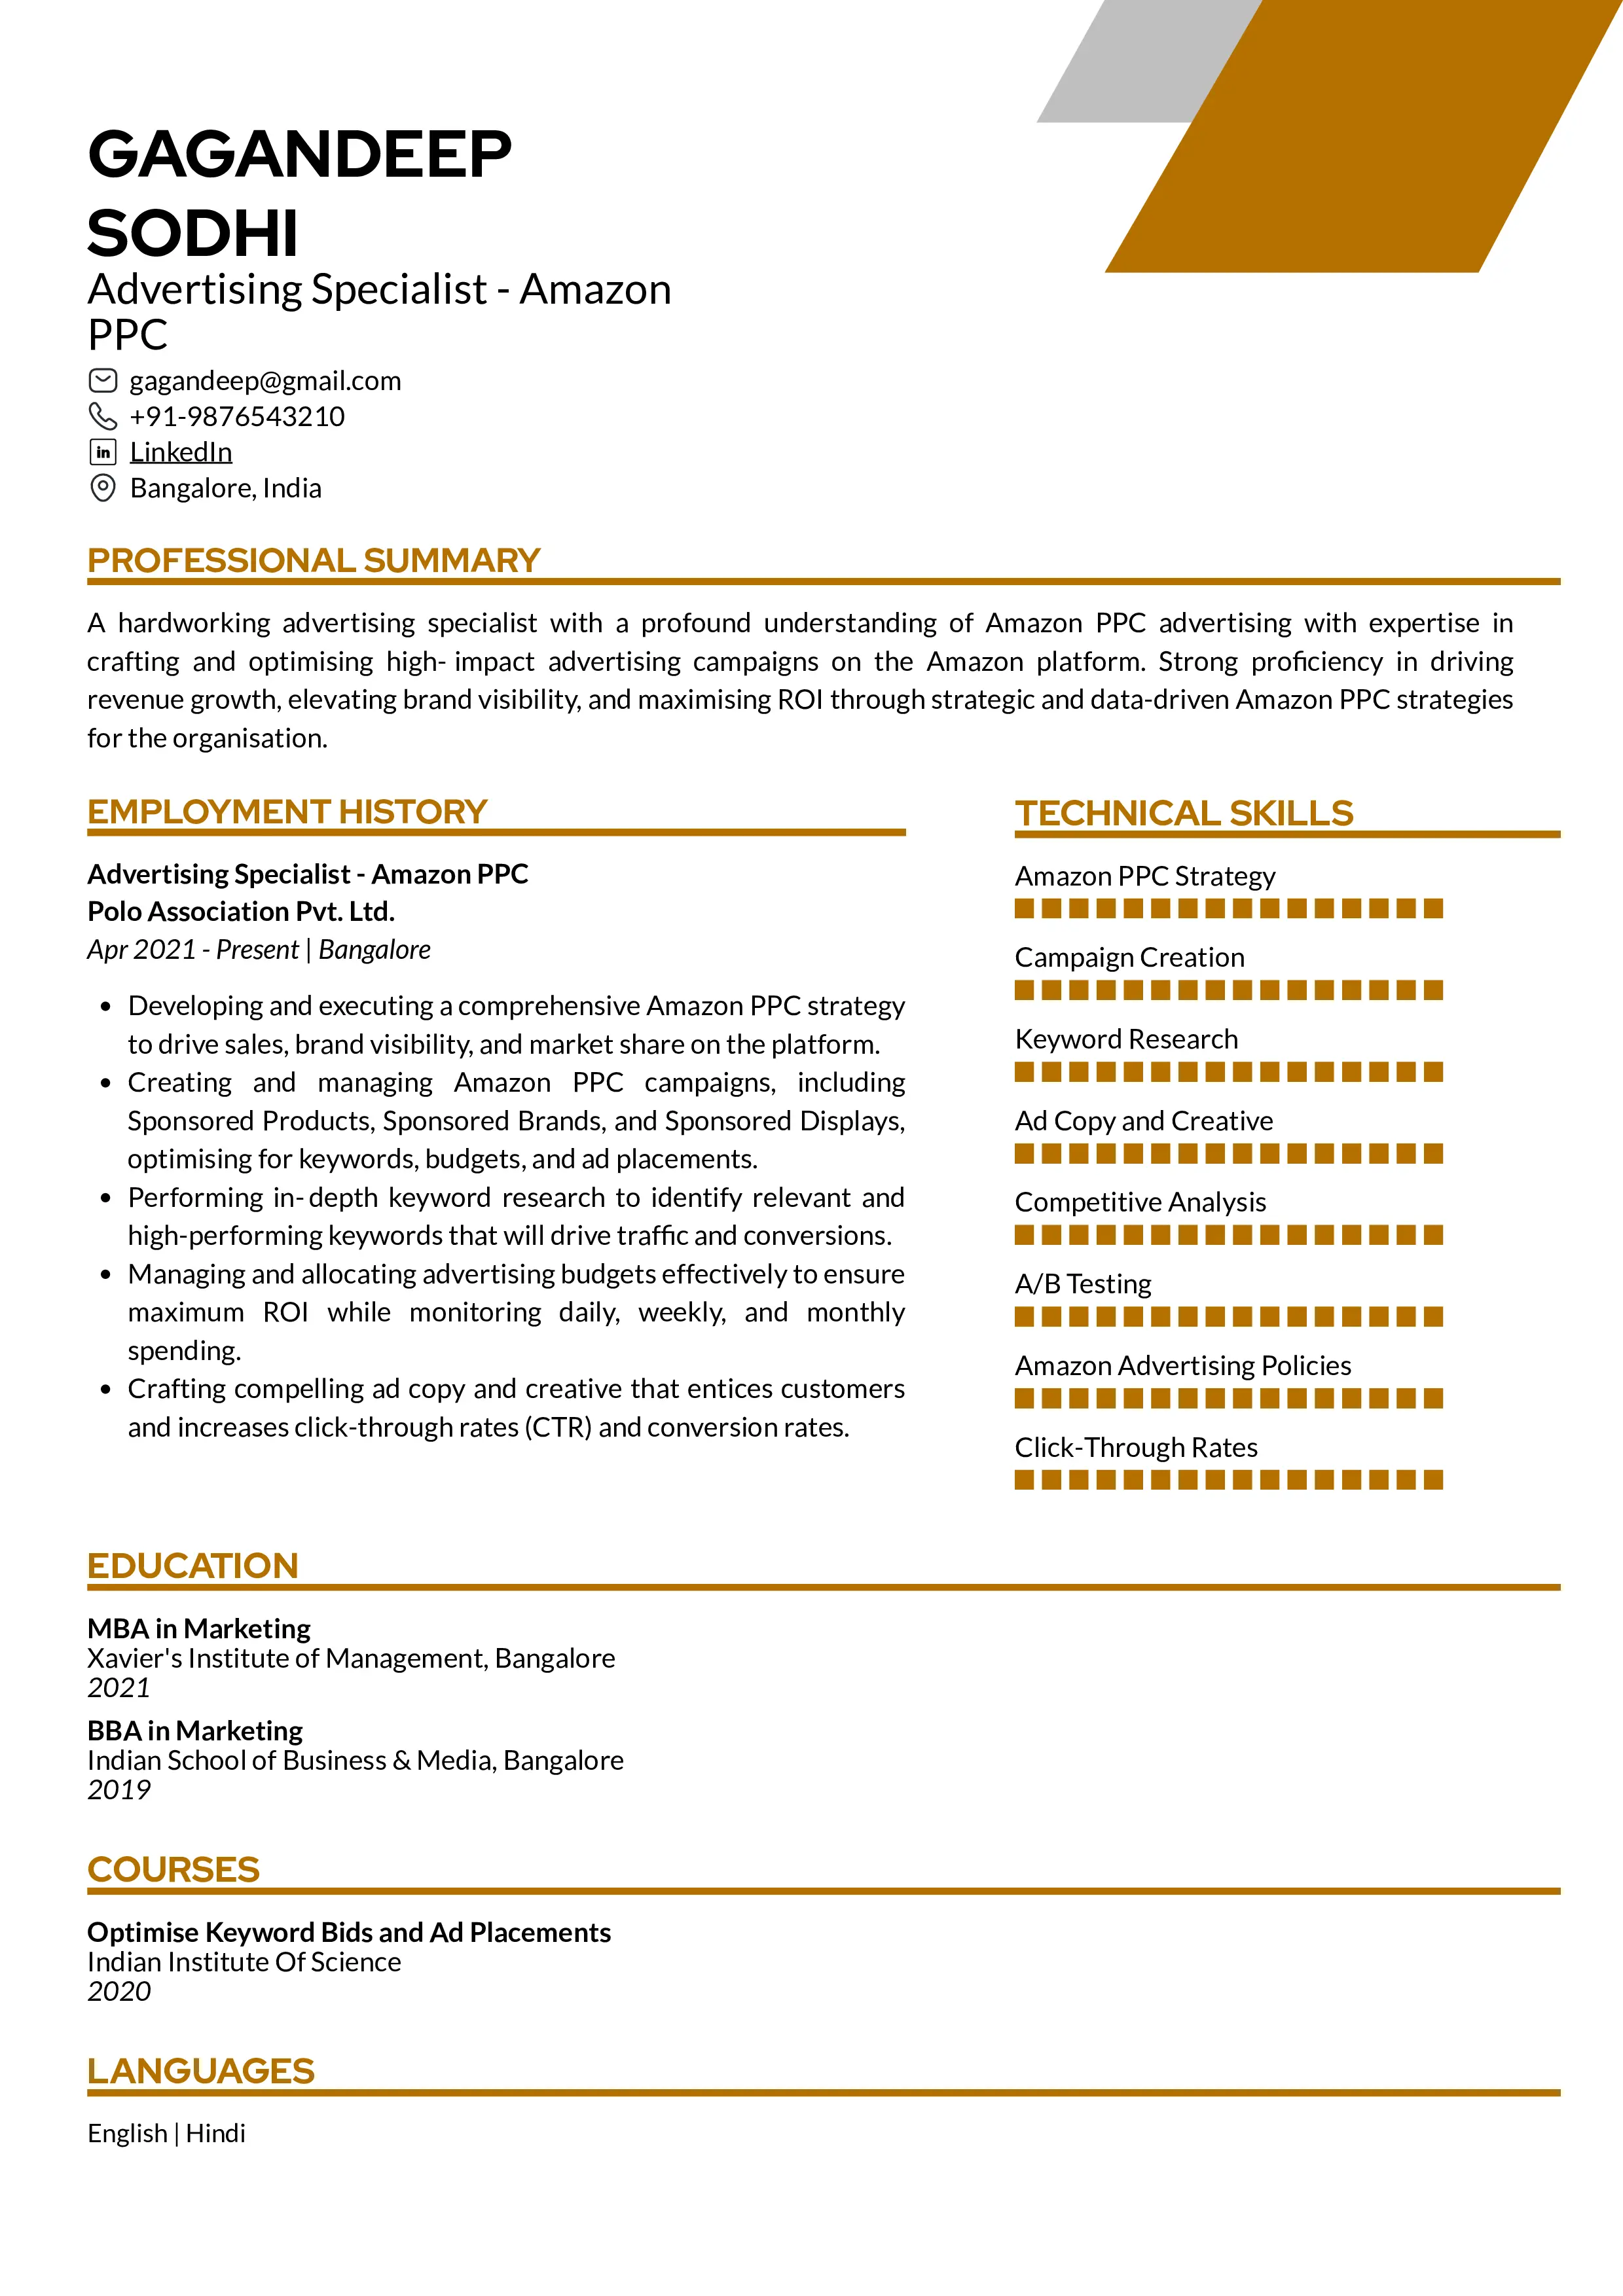 Sample Resume of Advertising Specialist - Amazon PPC | Free Resume Templates & Samples on Resumod.co